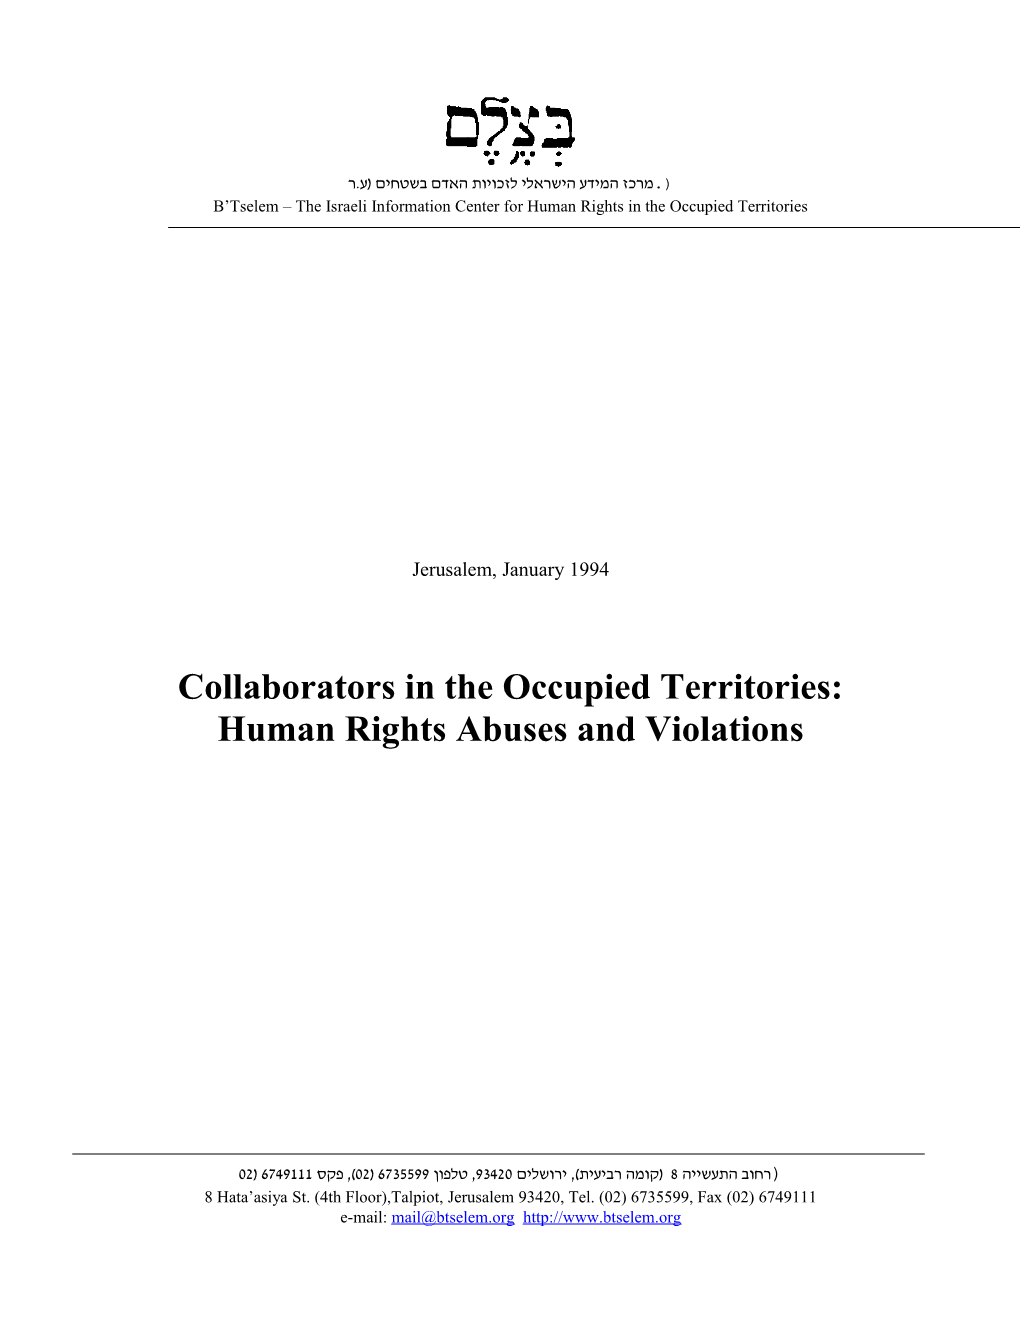 B'tselem Report - Collaborators in the Occupied Territories: Human Rights Abuses and Violations